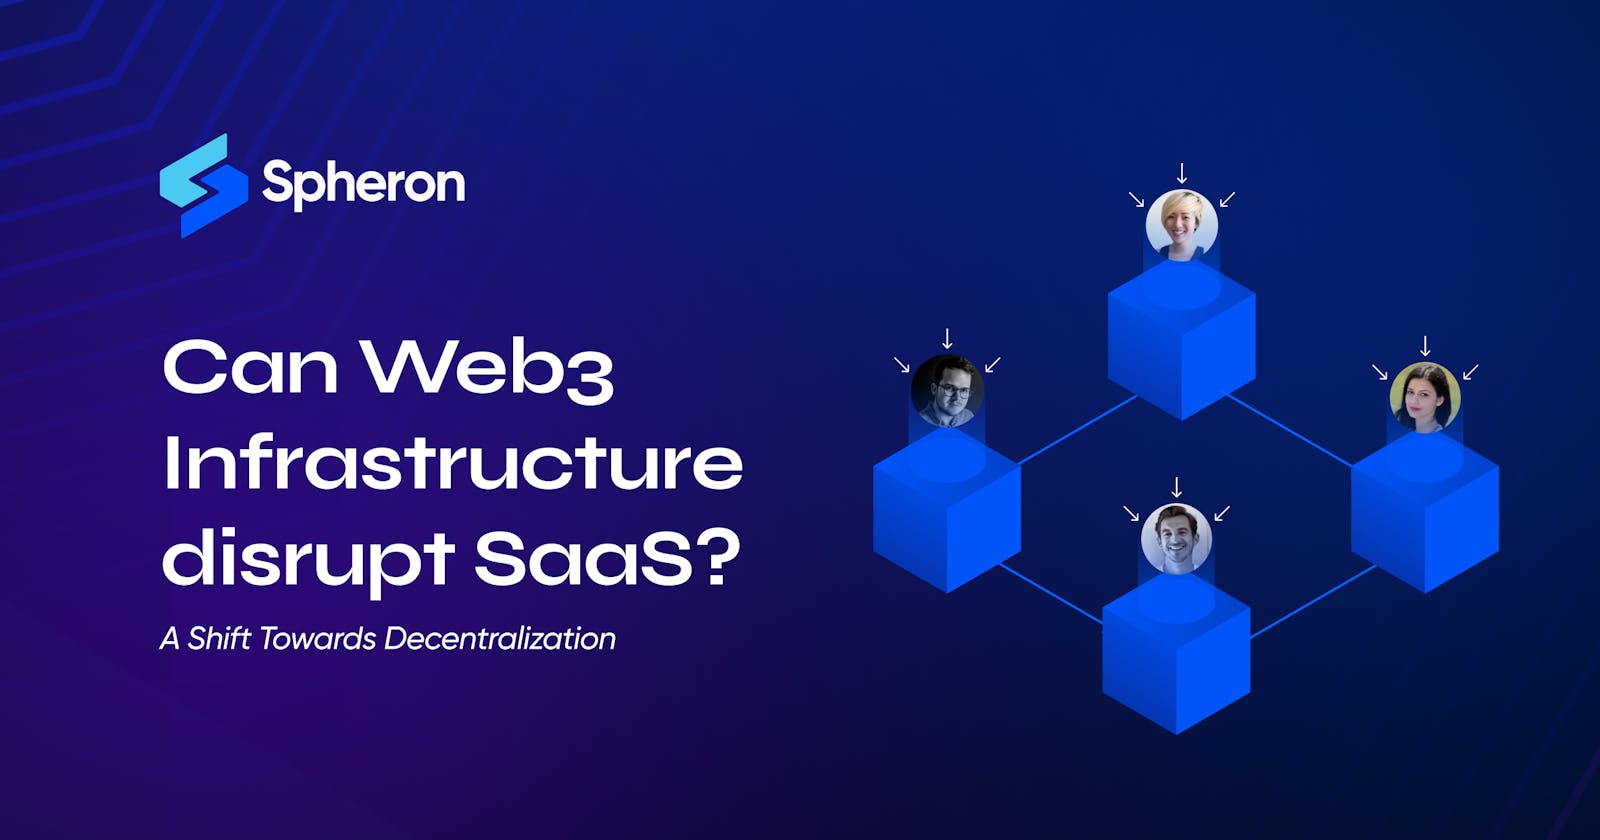 Can Web3 Infrastructure disrupt SaaS? A Shift Towards Decentralization